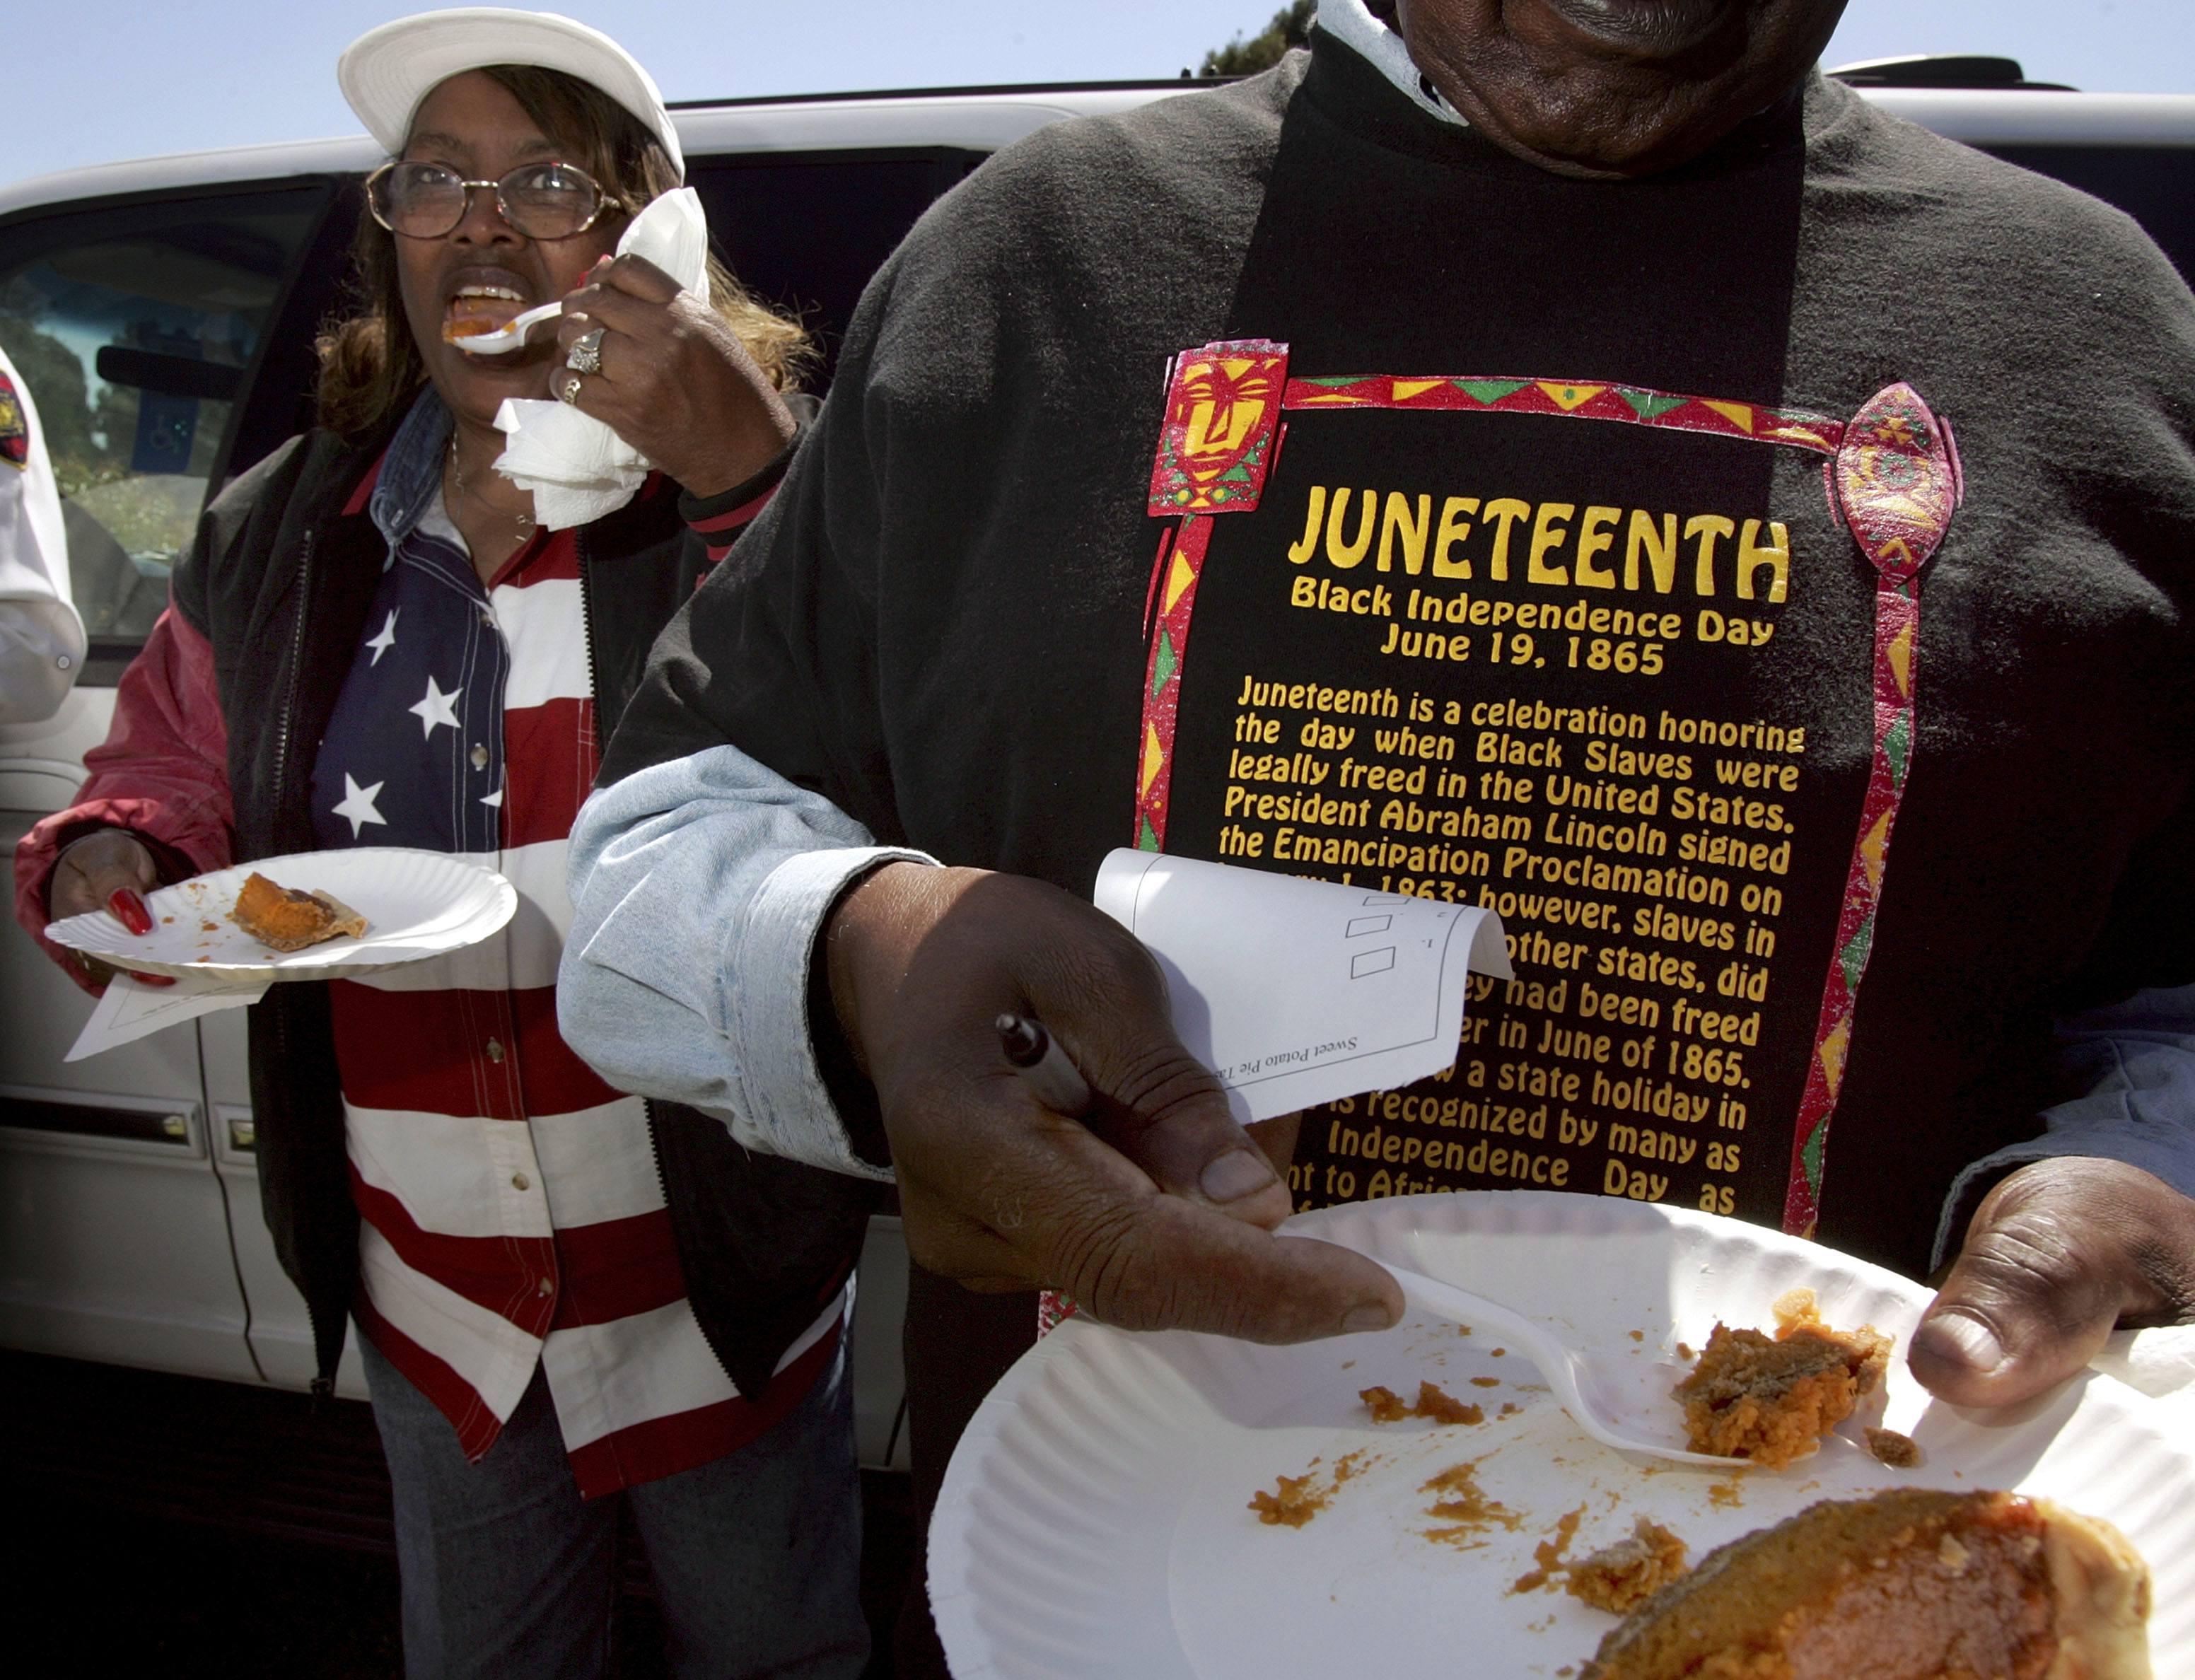 Learn Why Charleston Apologized for Its Role in Slavery on the Anniversary of Juneteenth